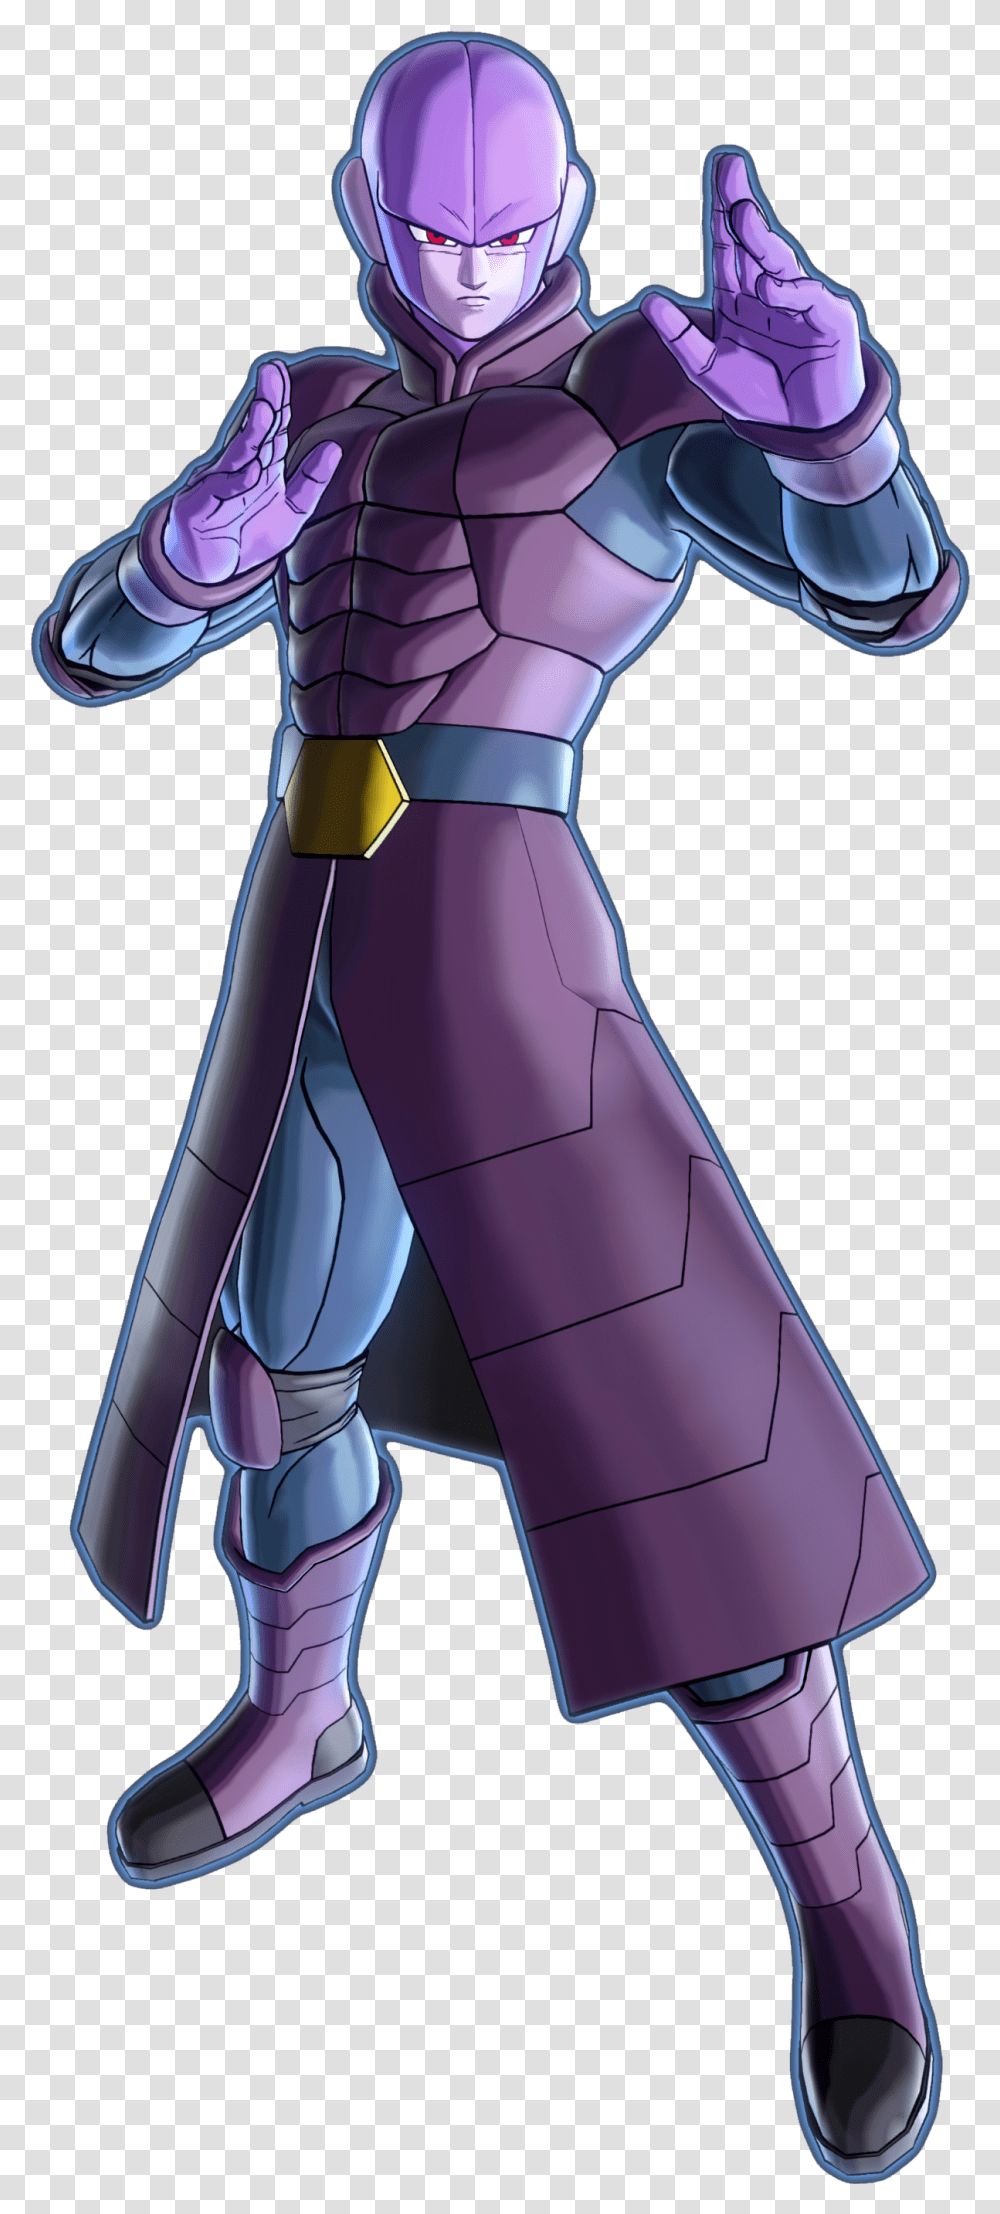 Hit Render Dragon Ball Xenoverse 2png Renders Aiktry Hit Dragon Ball Xenoverse, Comics, Book, Manga, Clothing Transparent Png